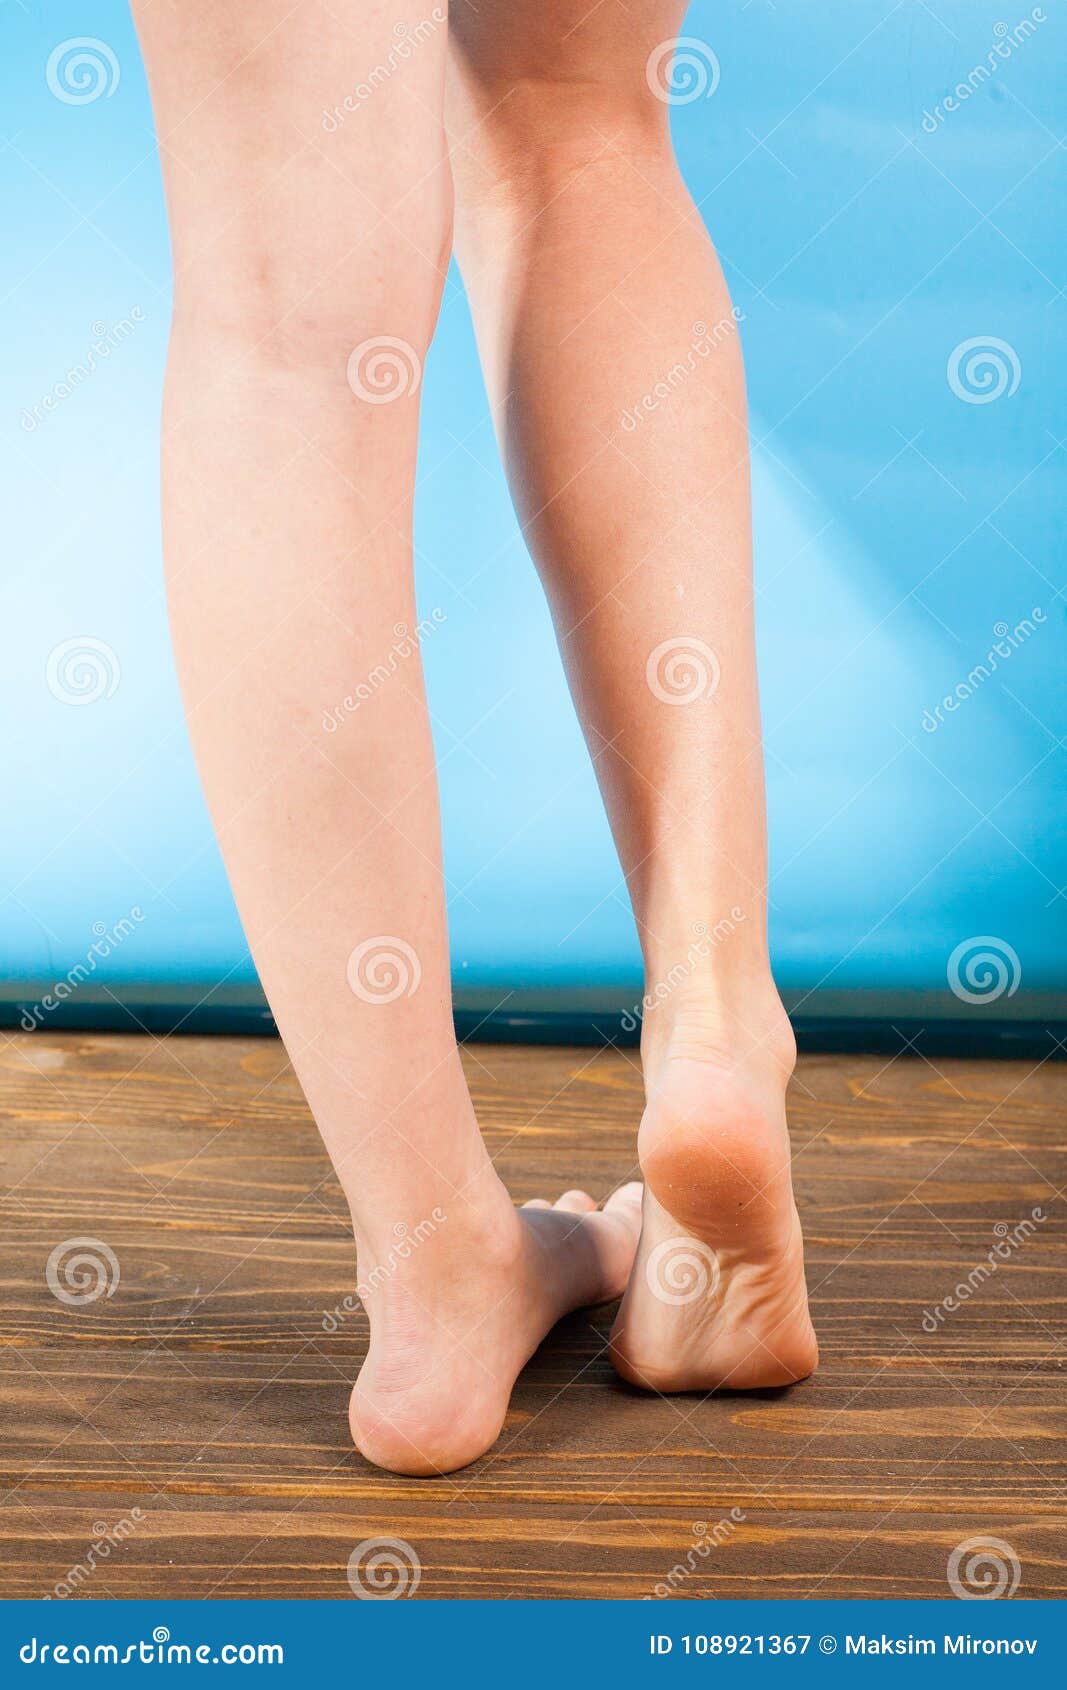 top of feet itch at night